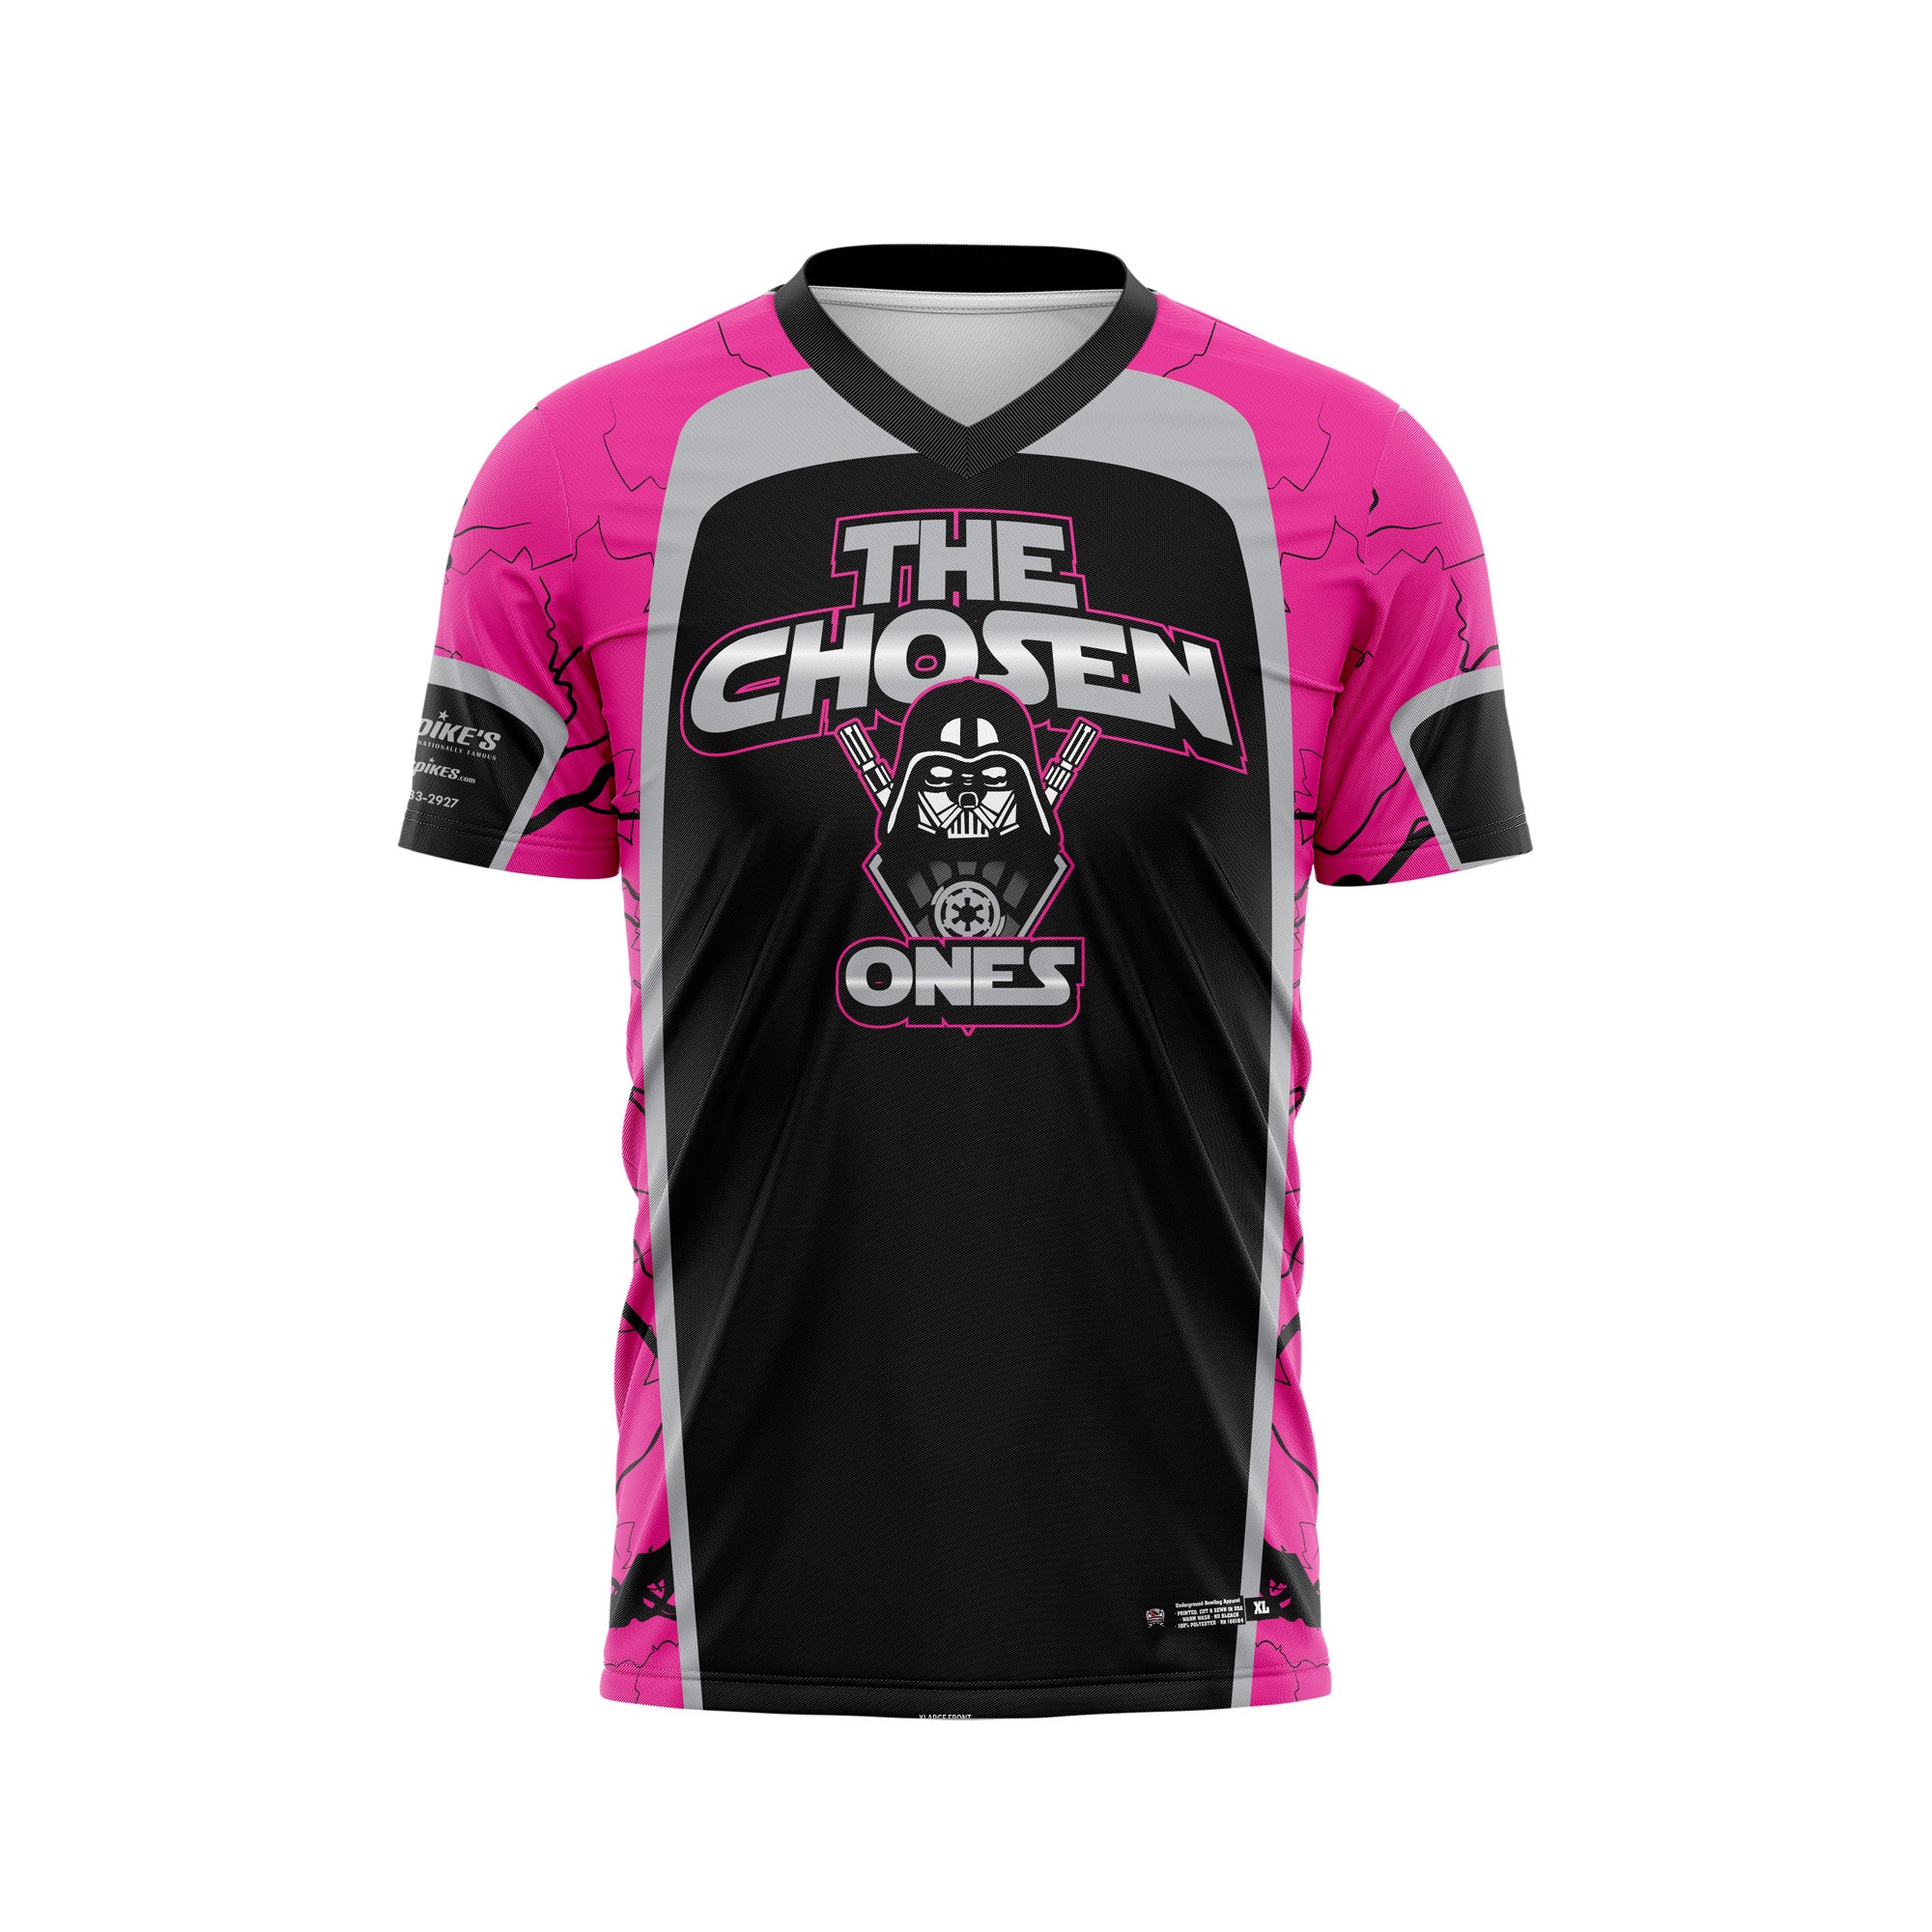 The Chosen Ones Breast Cancer Jersey